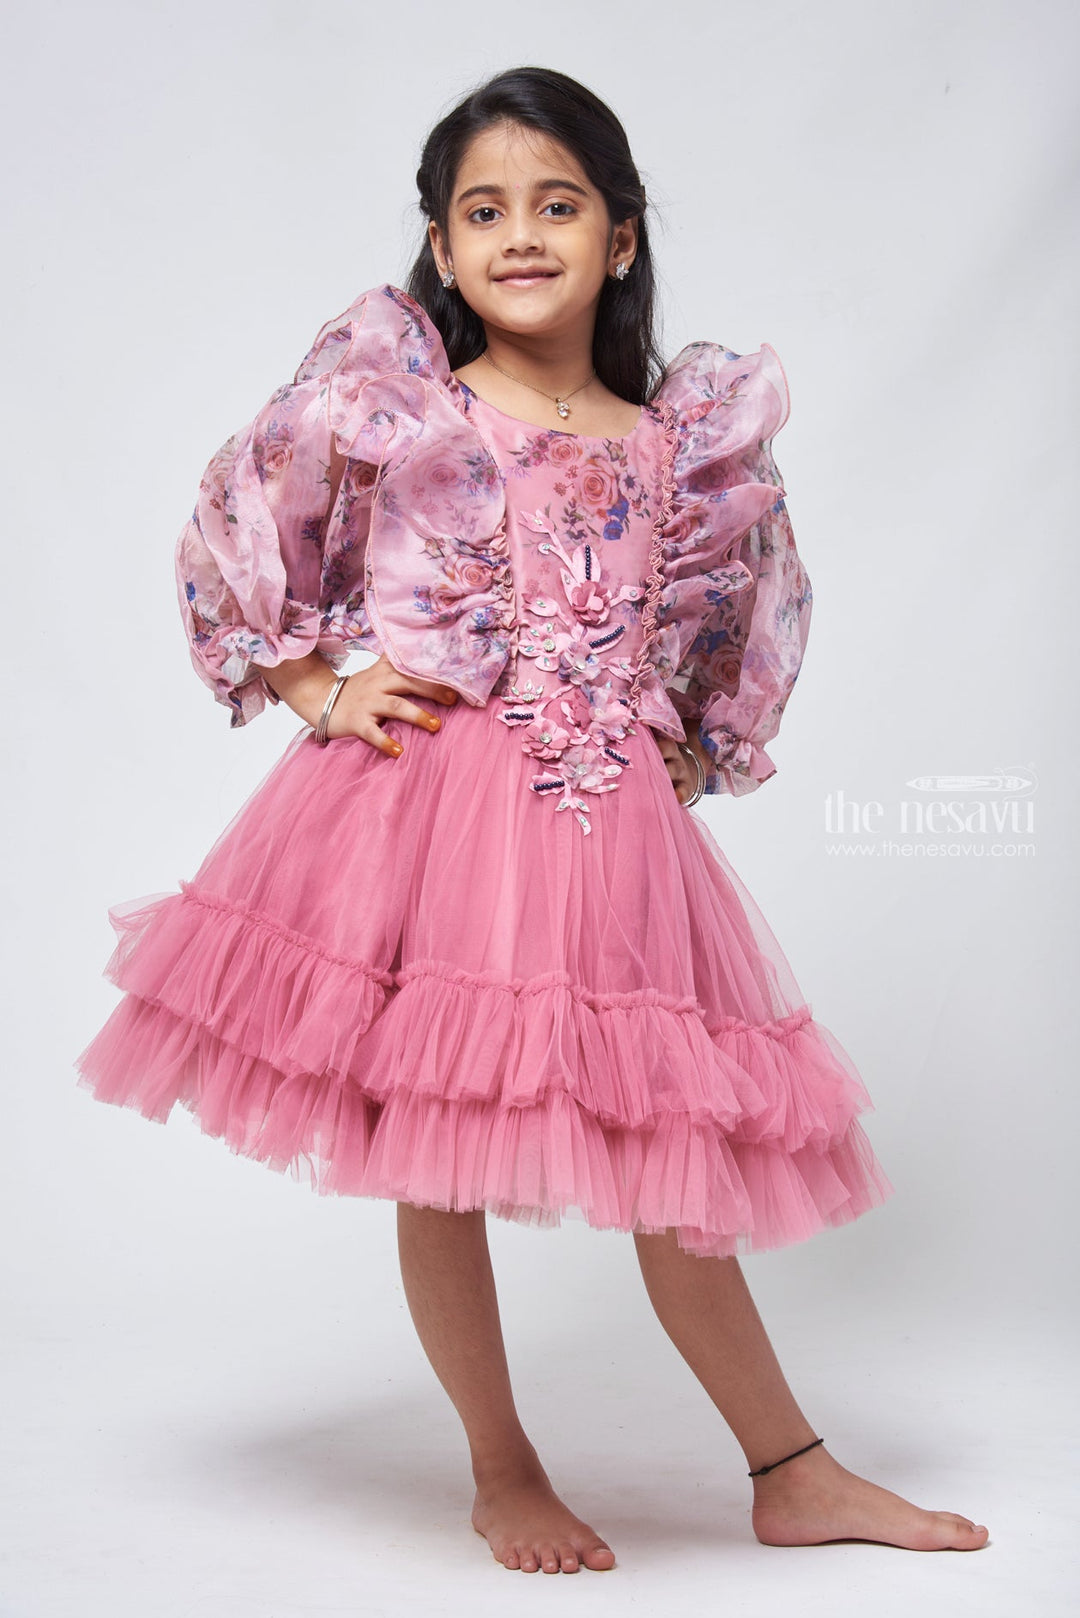 The Nesavu Girls Tutu Frock Girls Chic Frock Perfect for Special Occasions and Celebrations Nesavu Fancy Dress For 3 Years Birthday | Party Dresses For Little Girls | The Nesavu